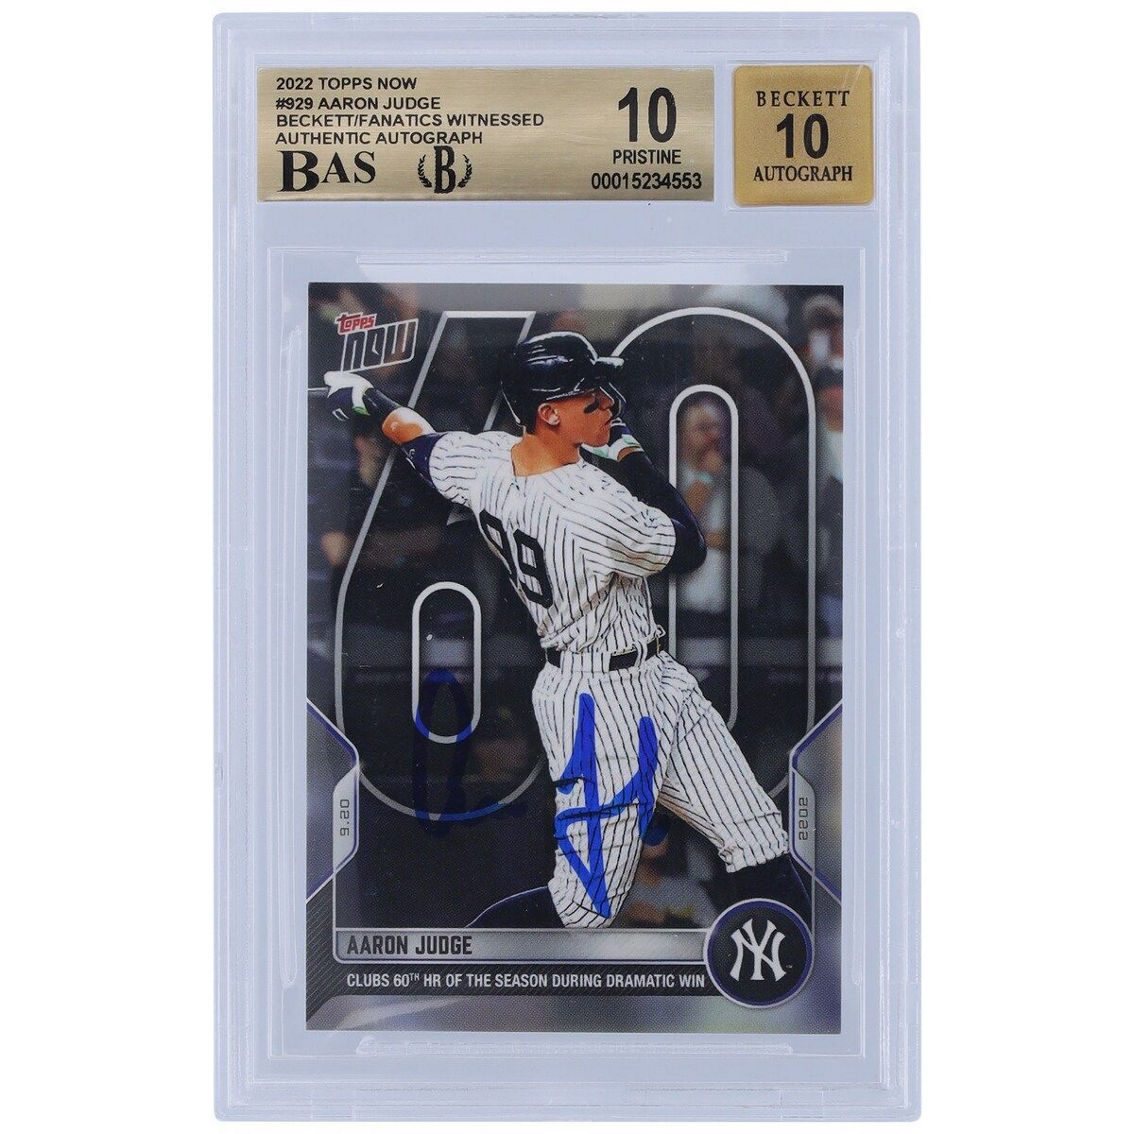 Topps Now Aaron Judge New York Yankees Autographed 2022 Topps Now HR 606162 3 Card Set #9299751012 Beckett Fanatics Witnessed Authenticated 10/10 Card - Image 4 of 4